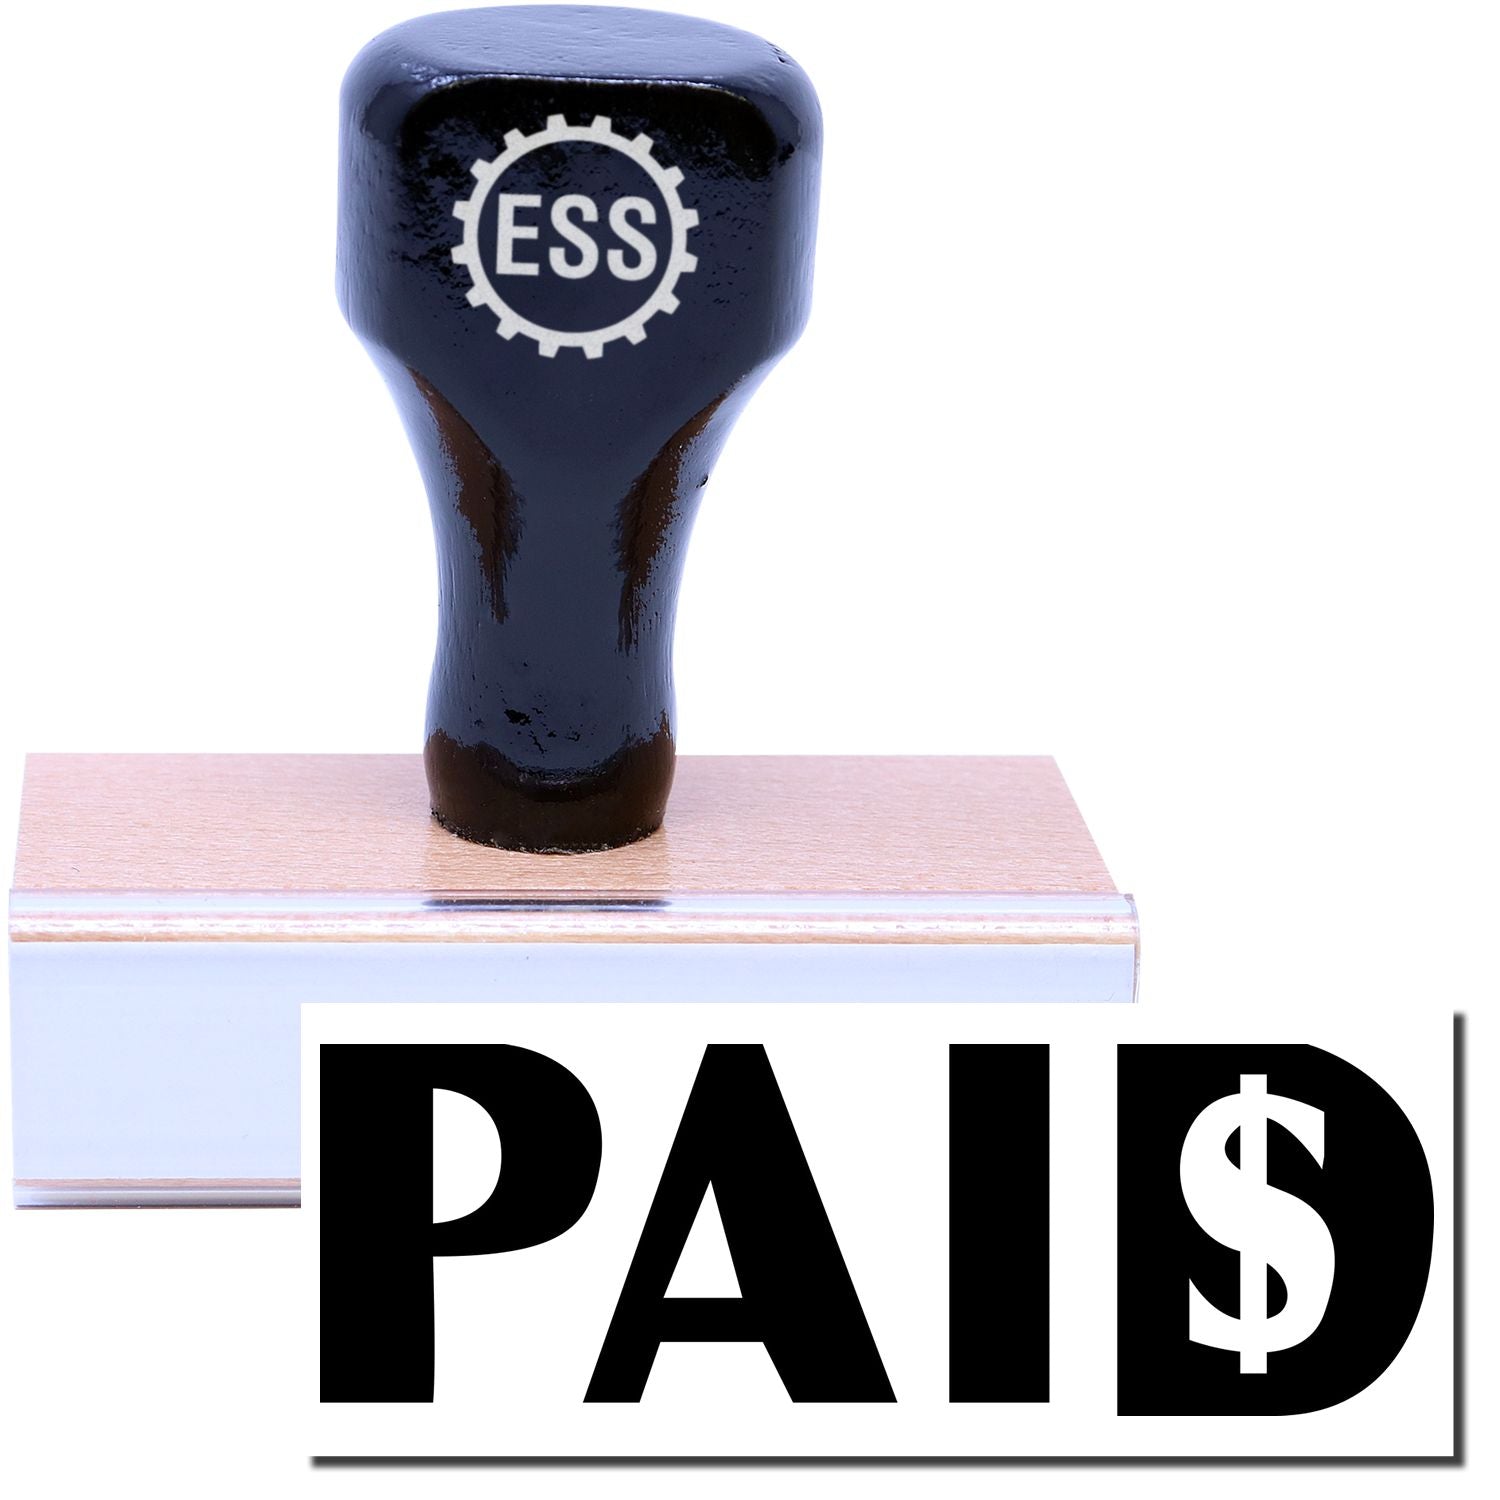 A stock office rubber stamp with a stamped image showing how the text "PAID" in bold font with a dollar sign inside the alphabet "D" is displayed after stamping.